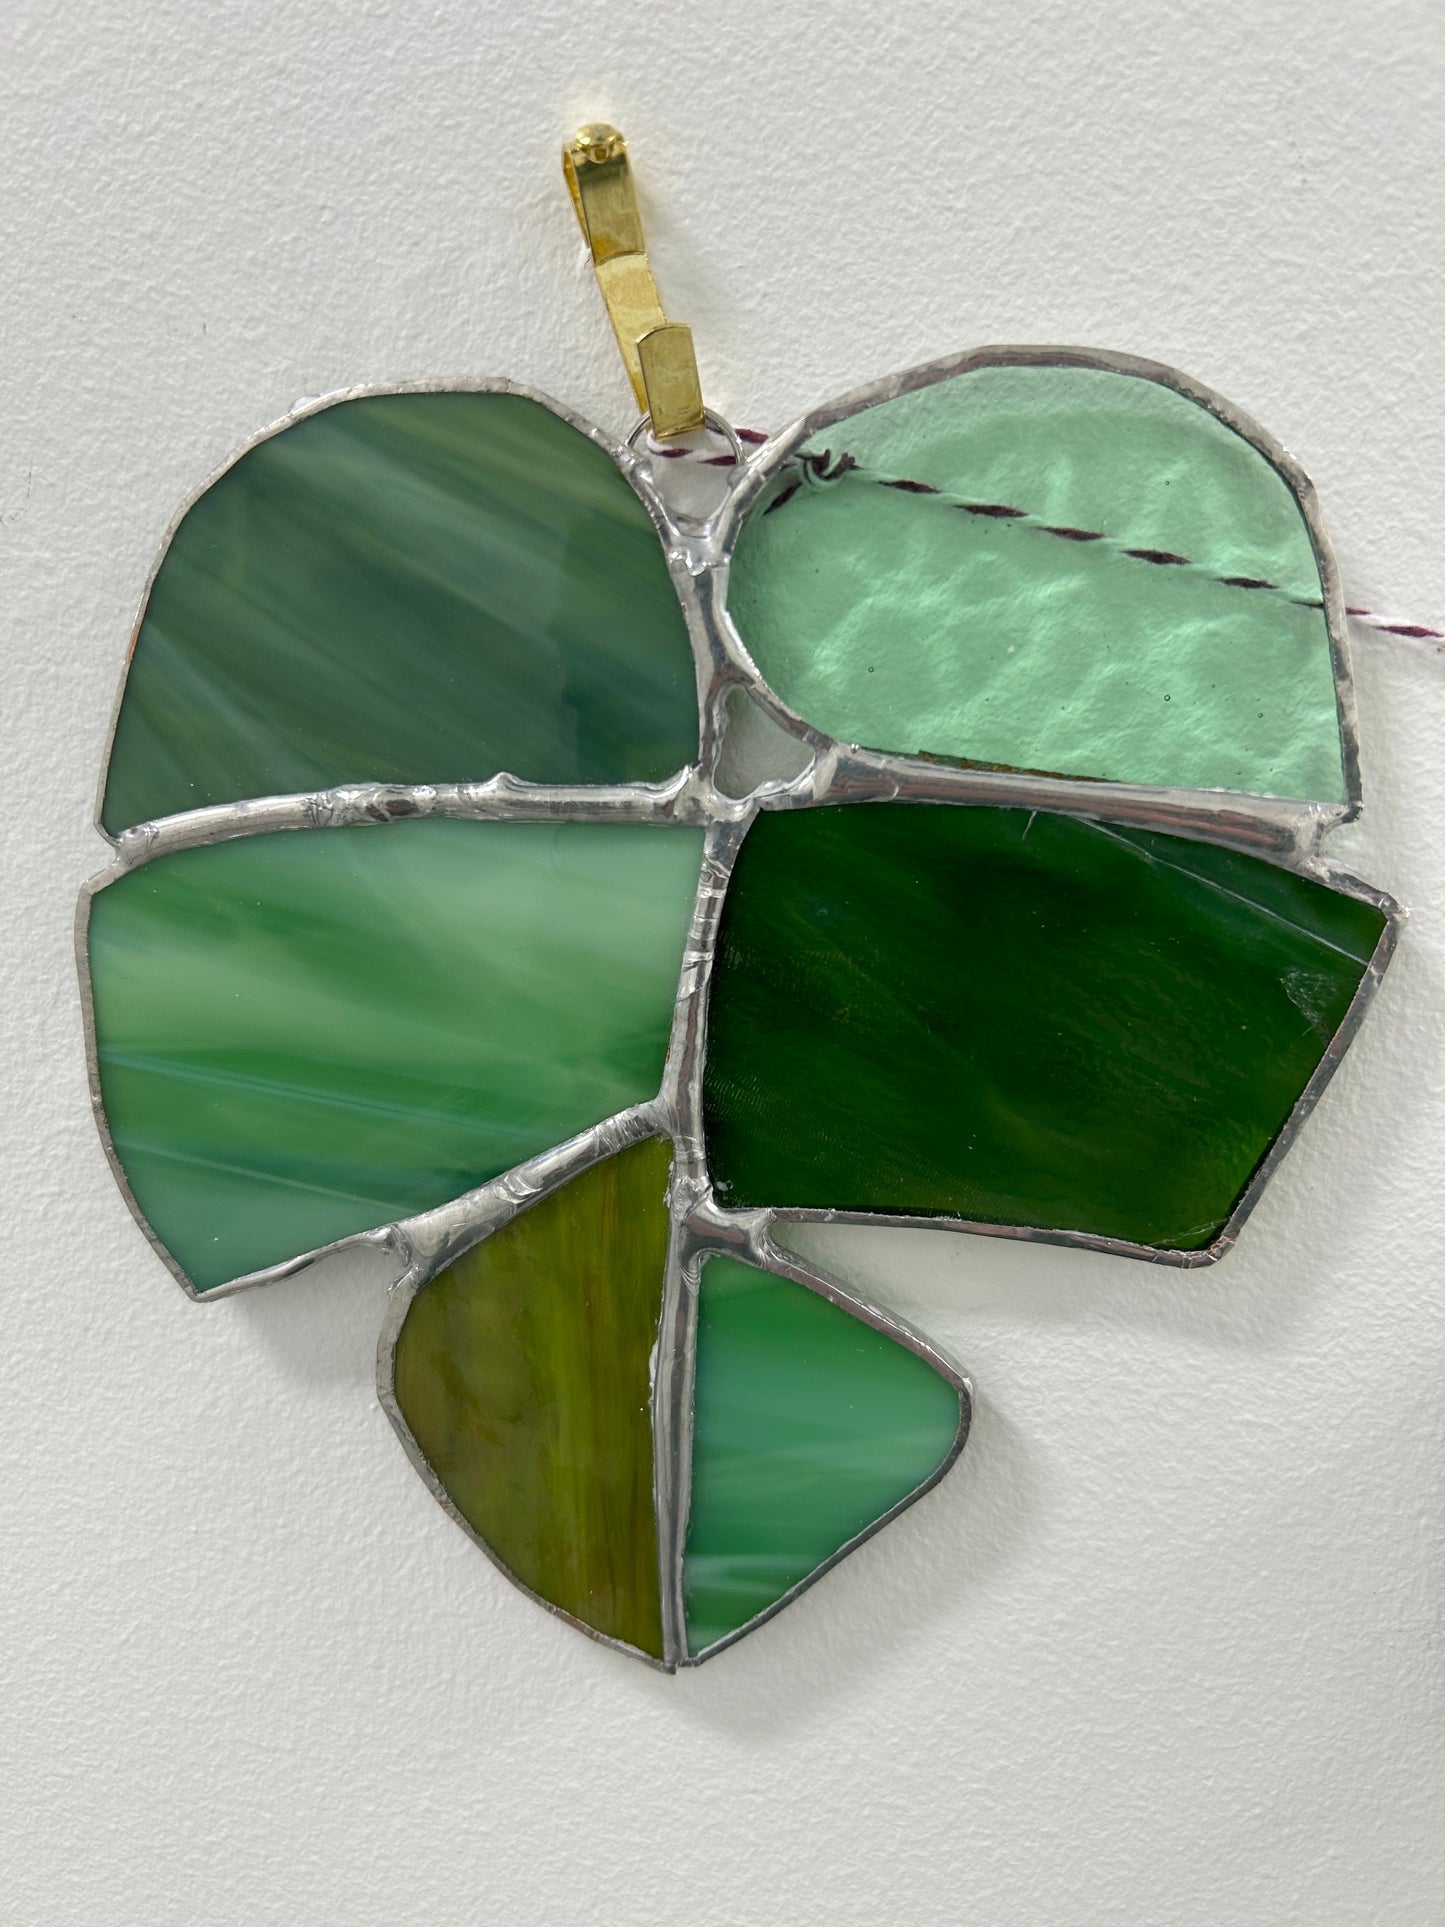 Beginner Stained Glass class, April 11, 4-6:30 pm